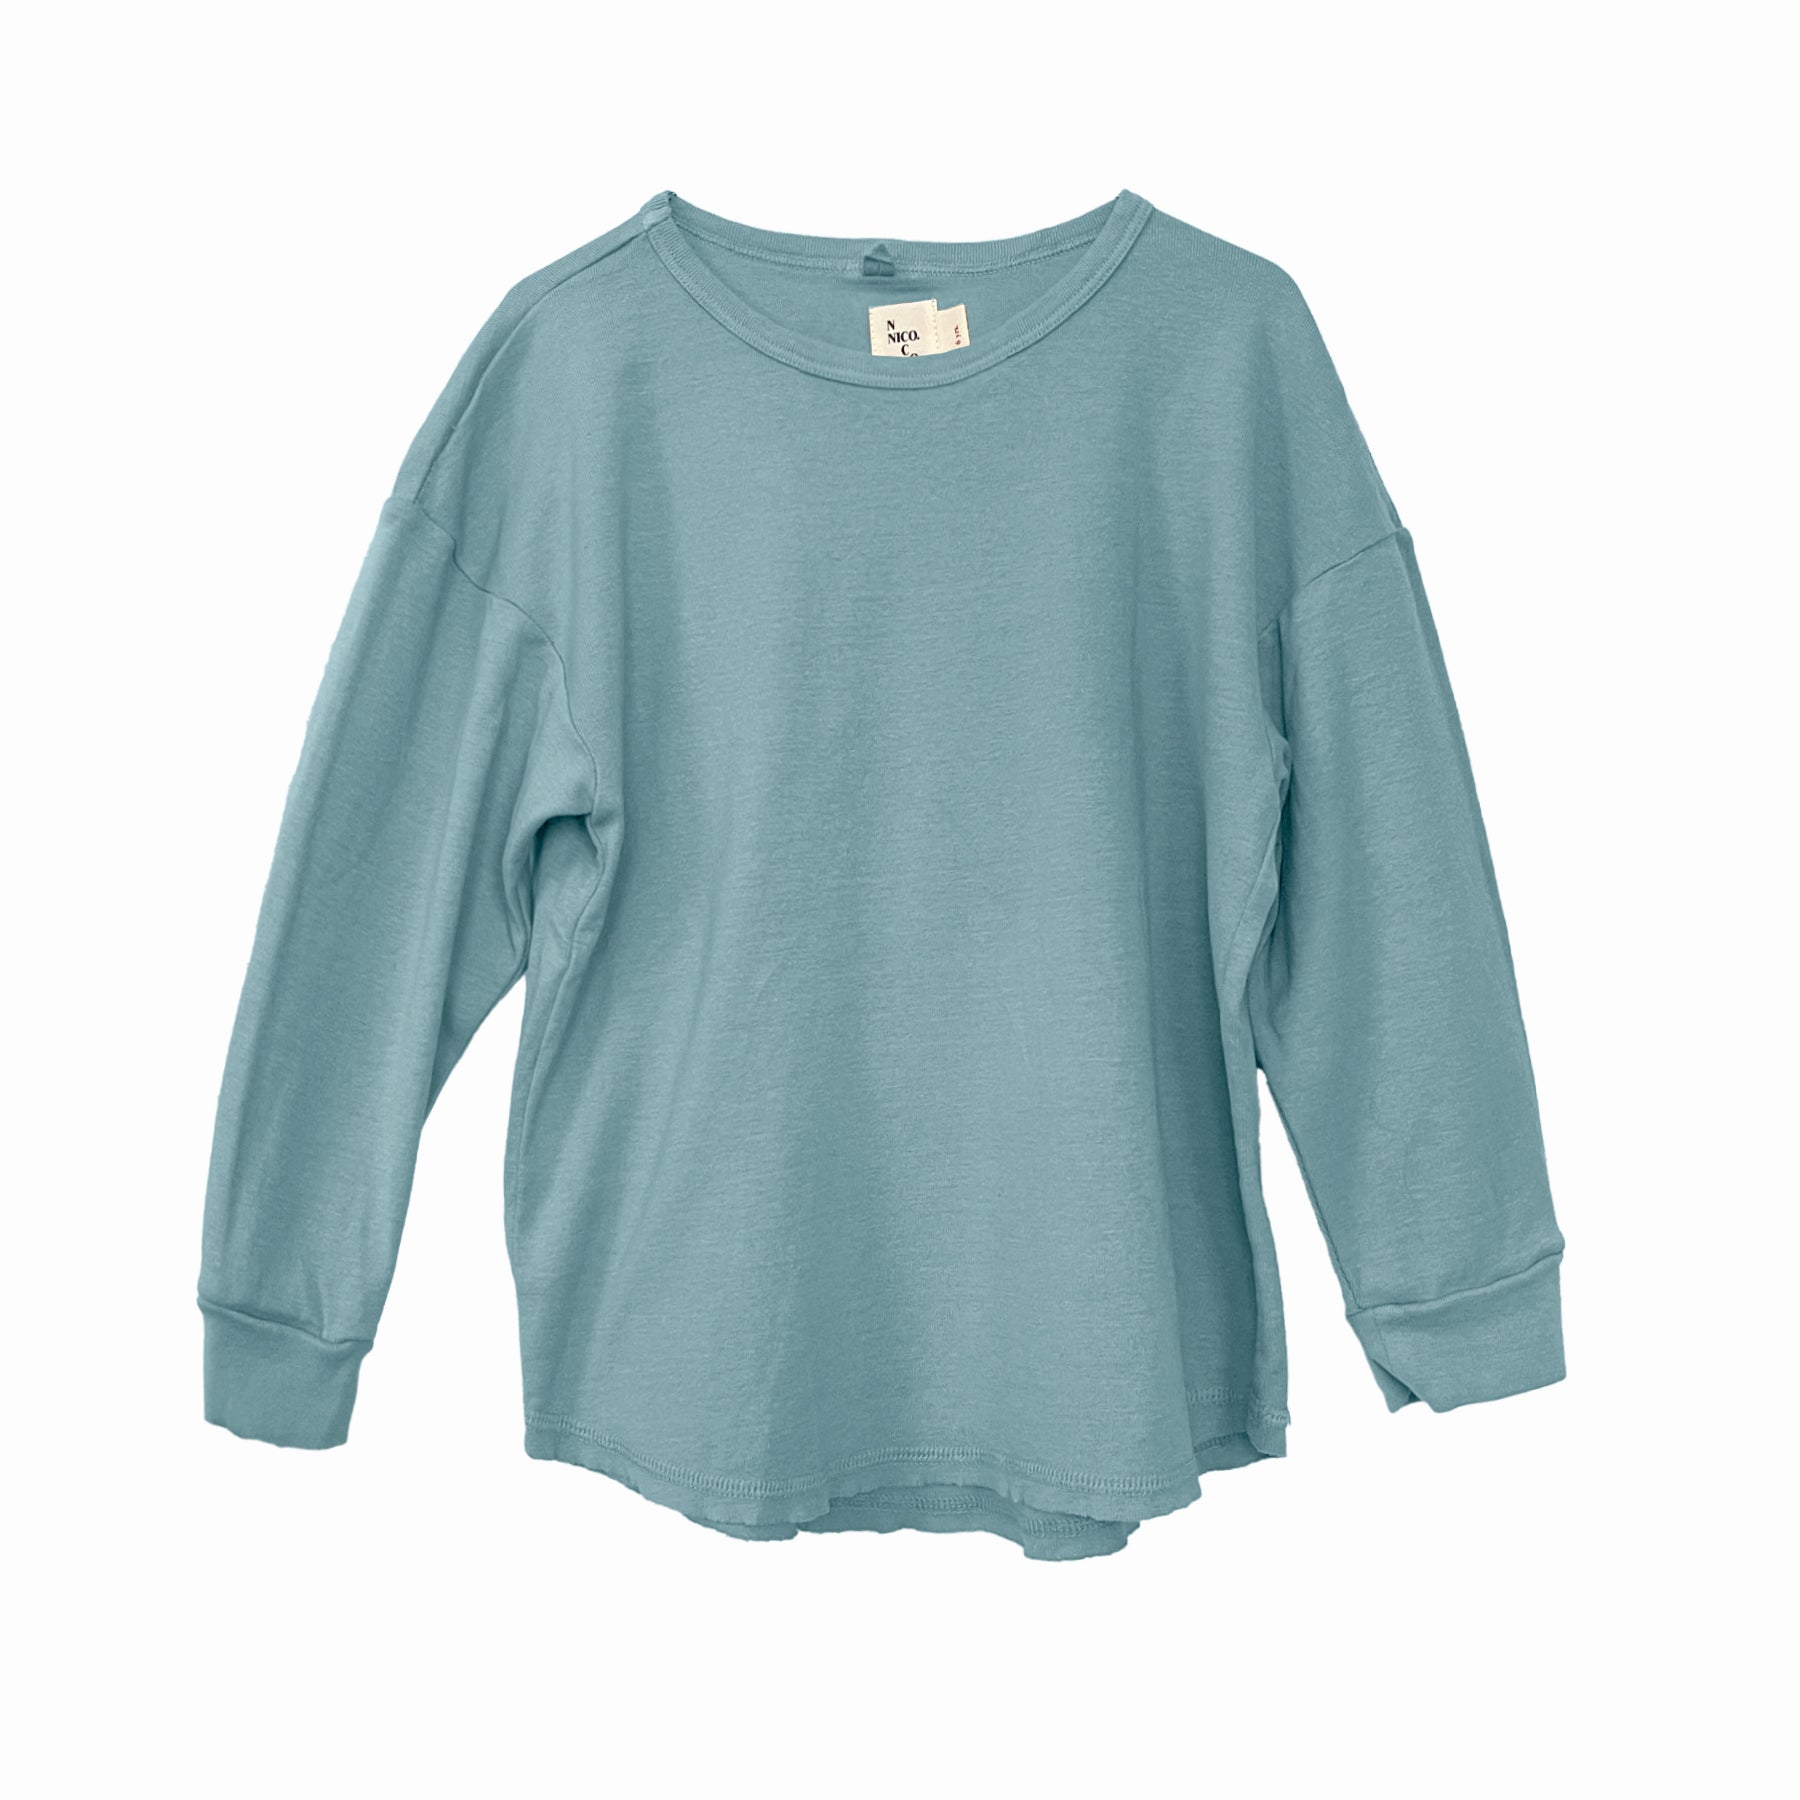 Axl Ribbed Long Sleeve - Fisher Blue / 18/24M